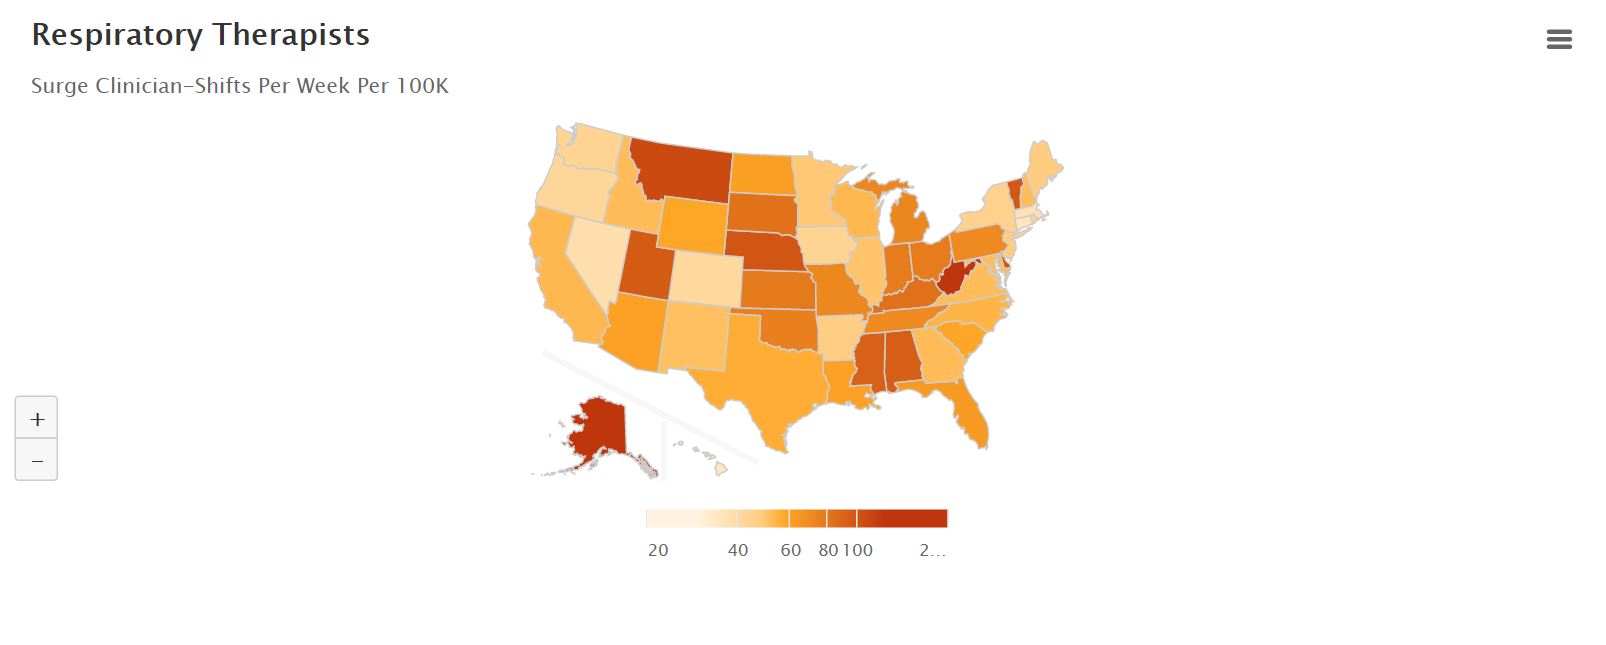 Respiratory Therapists – Choropleth map